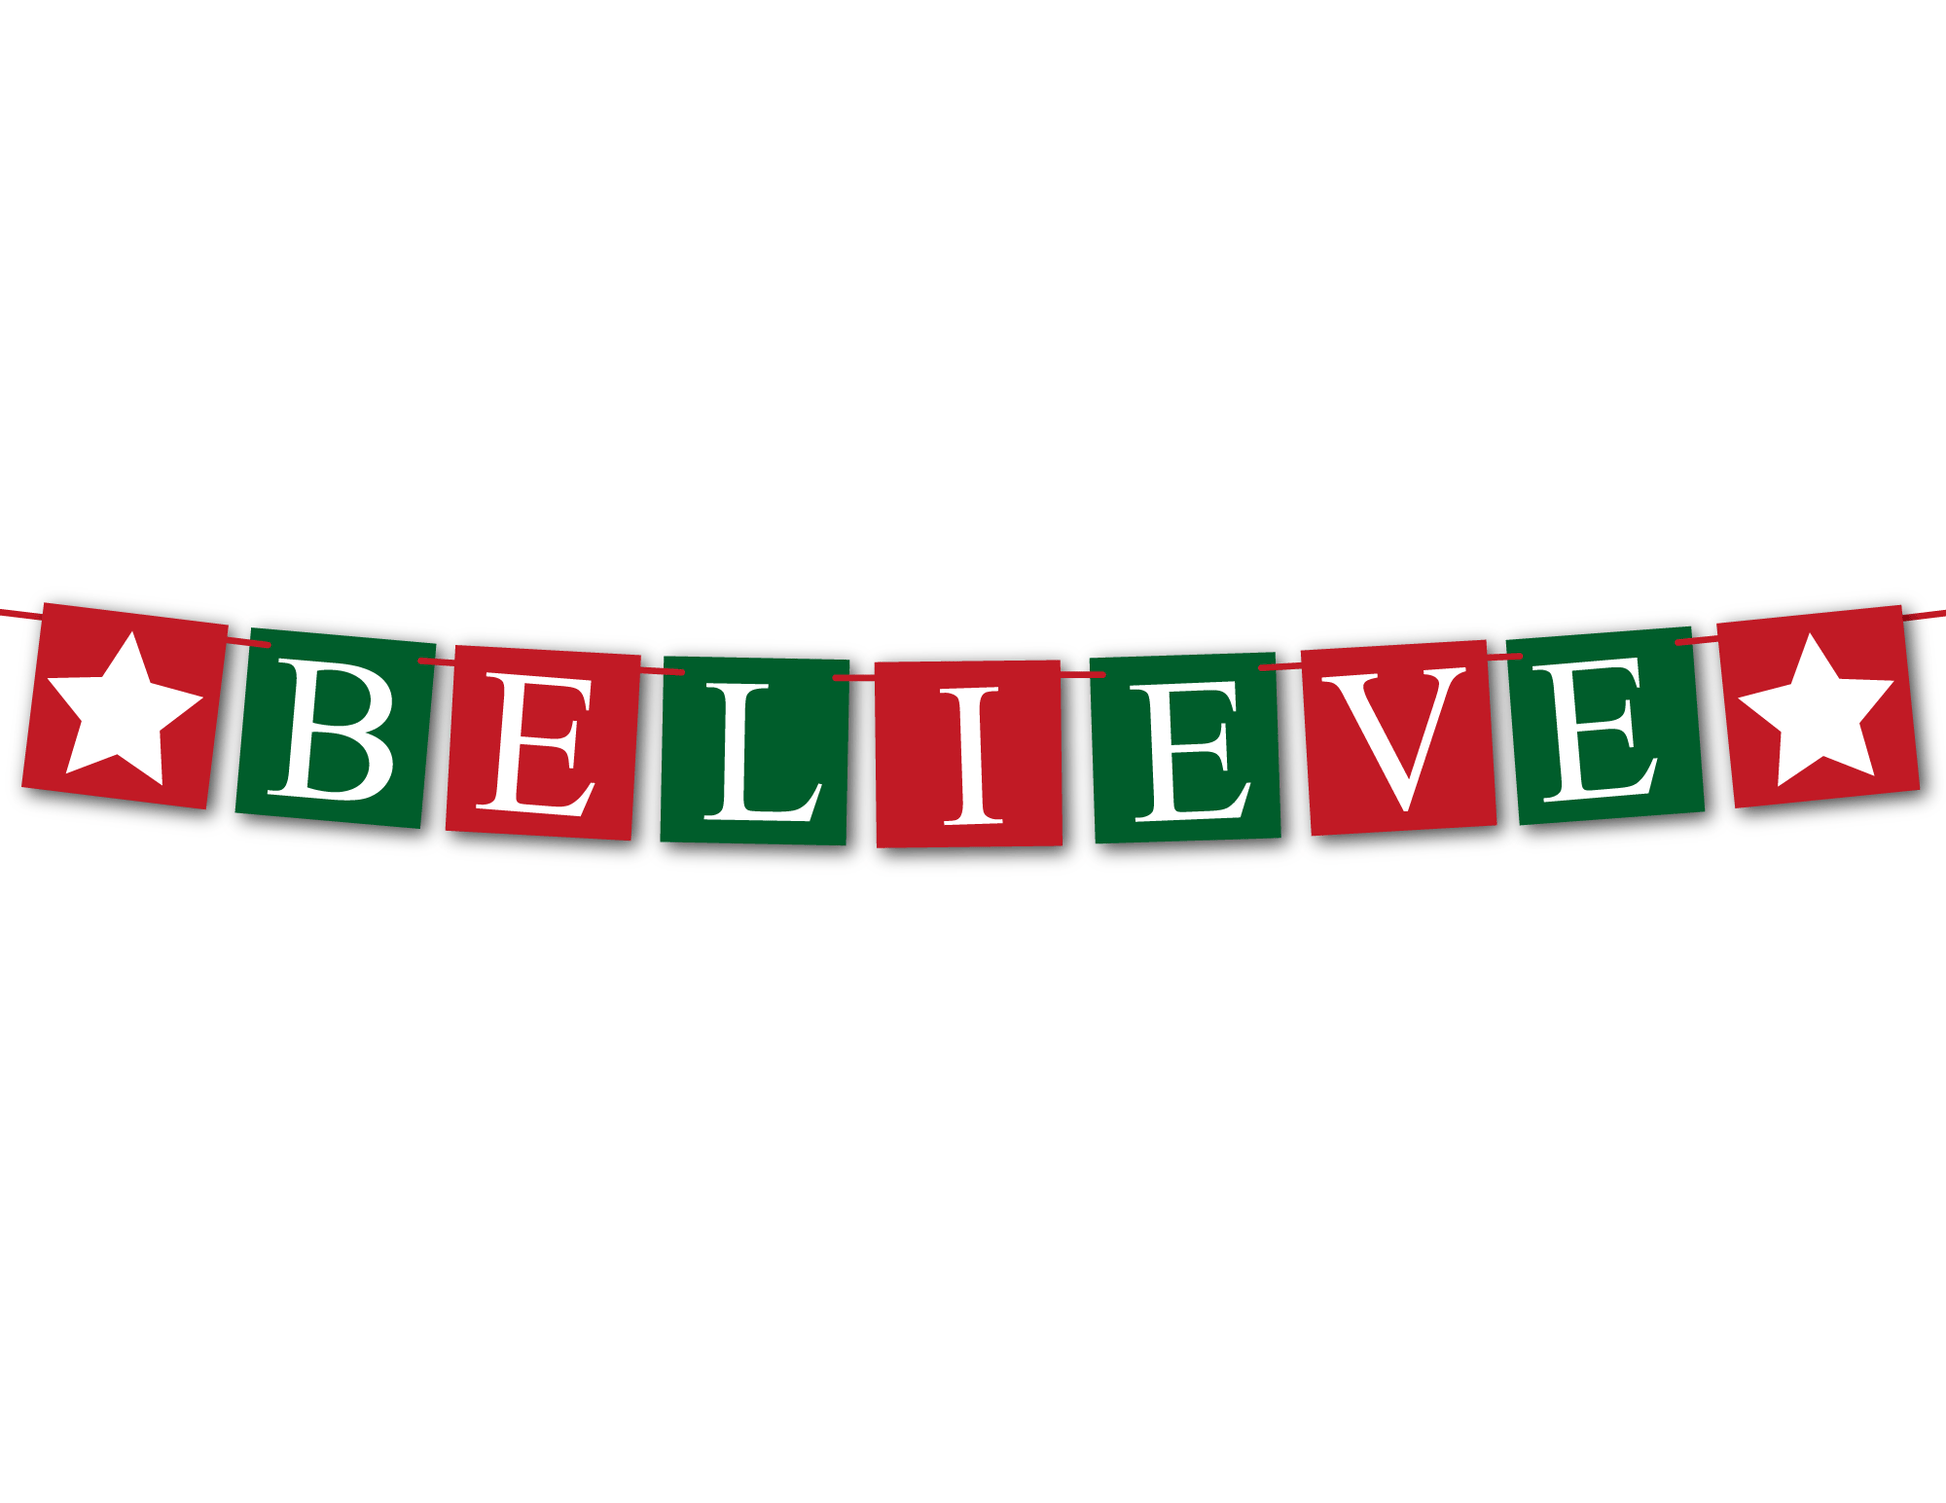 Printable red and green believe banner - Celebrating Together